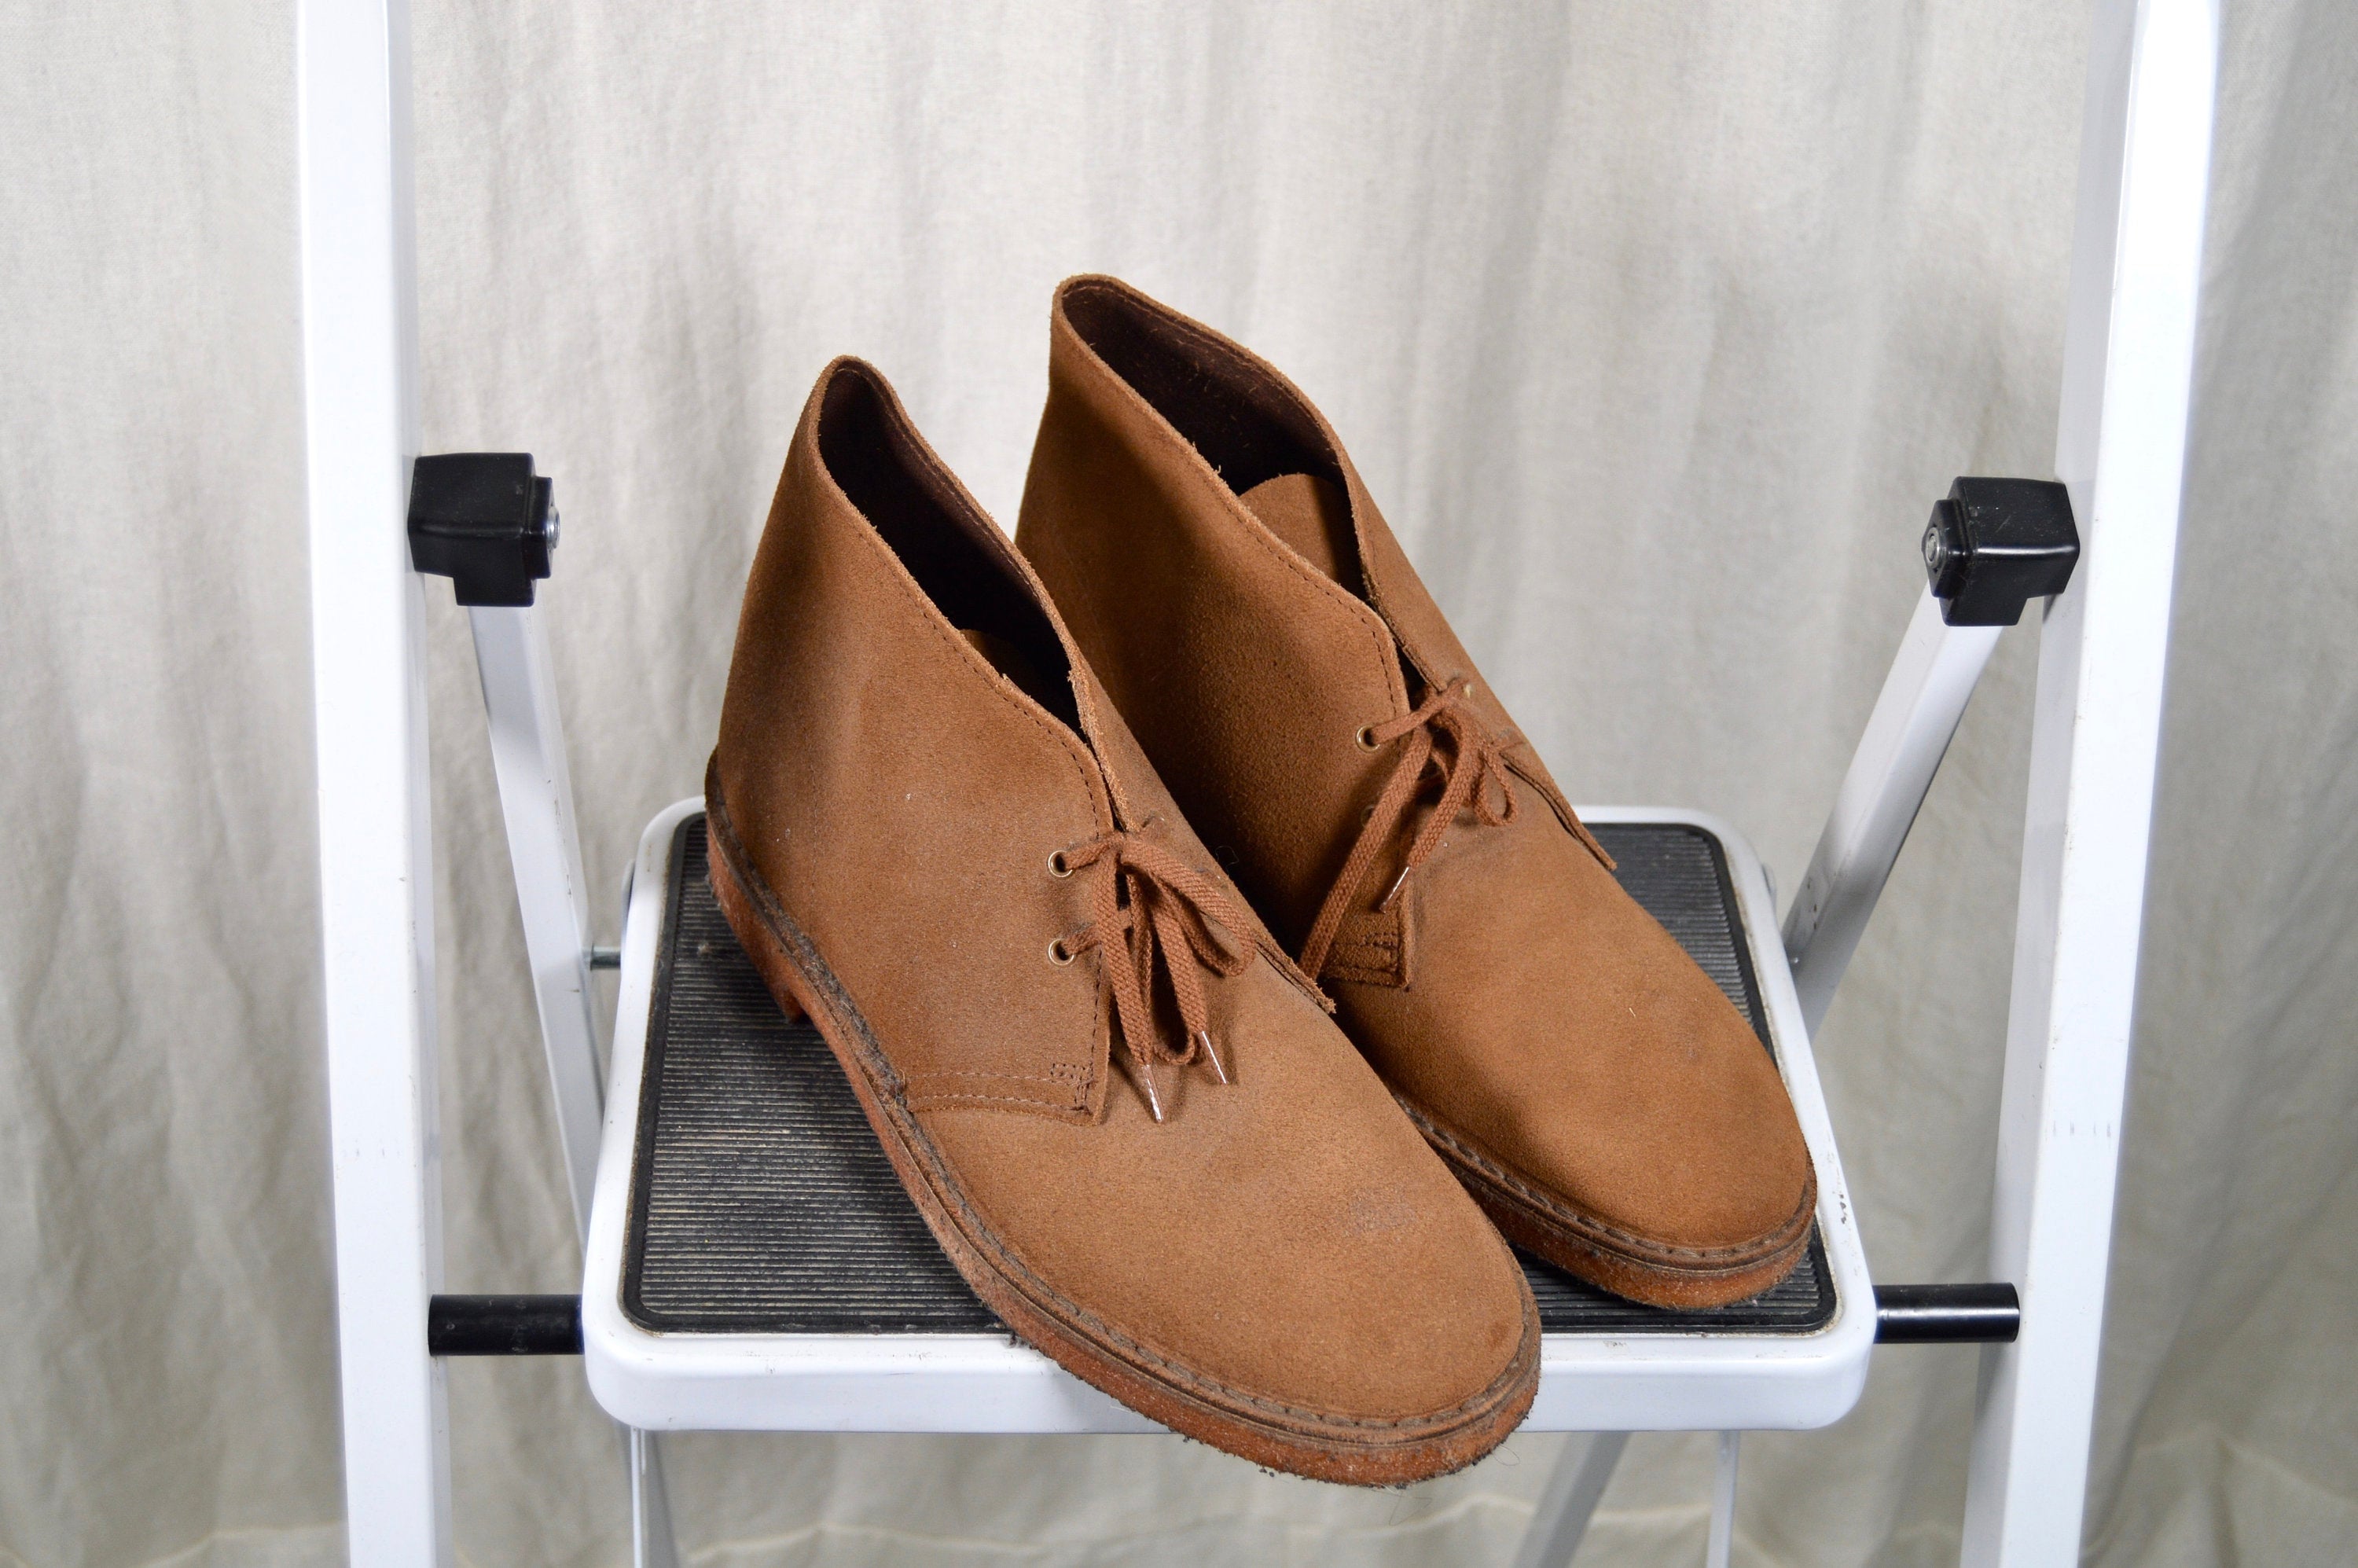 NEW: CLARKS Suede Desert Boots / Sewn / Sole /